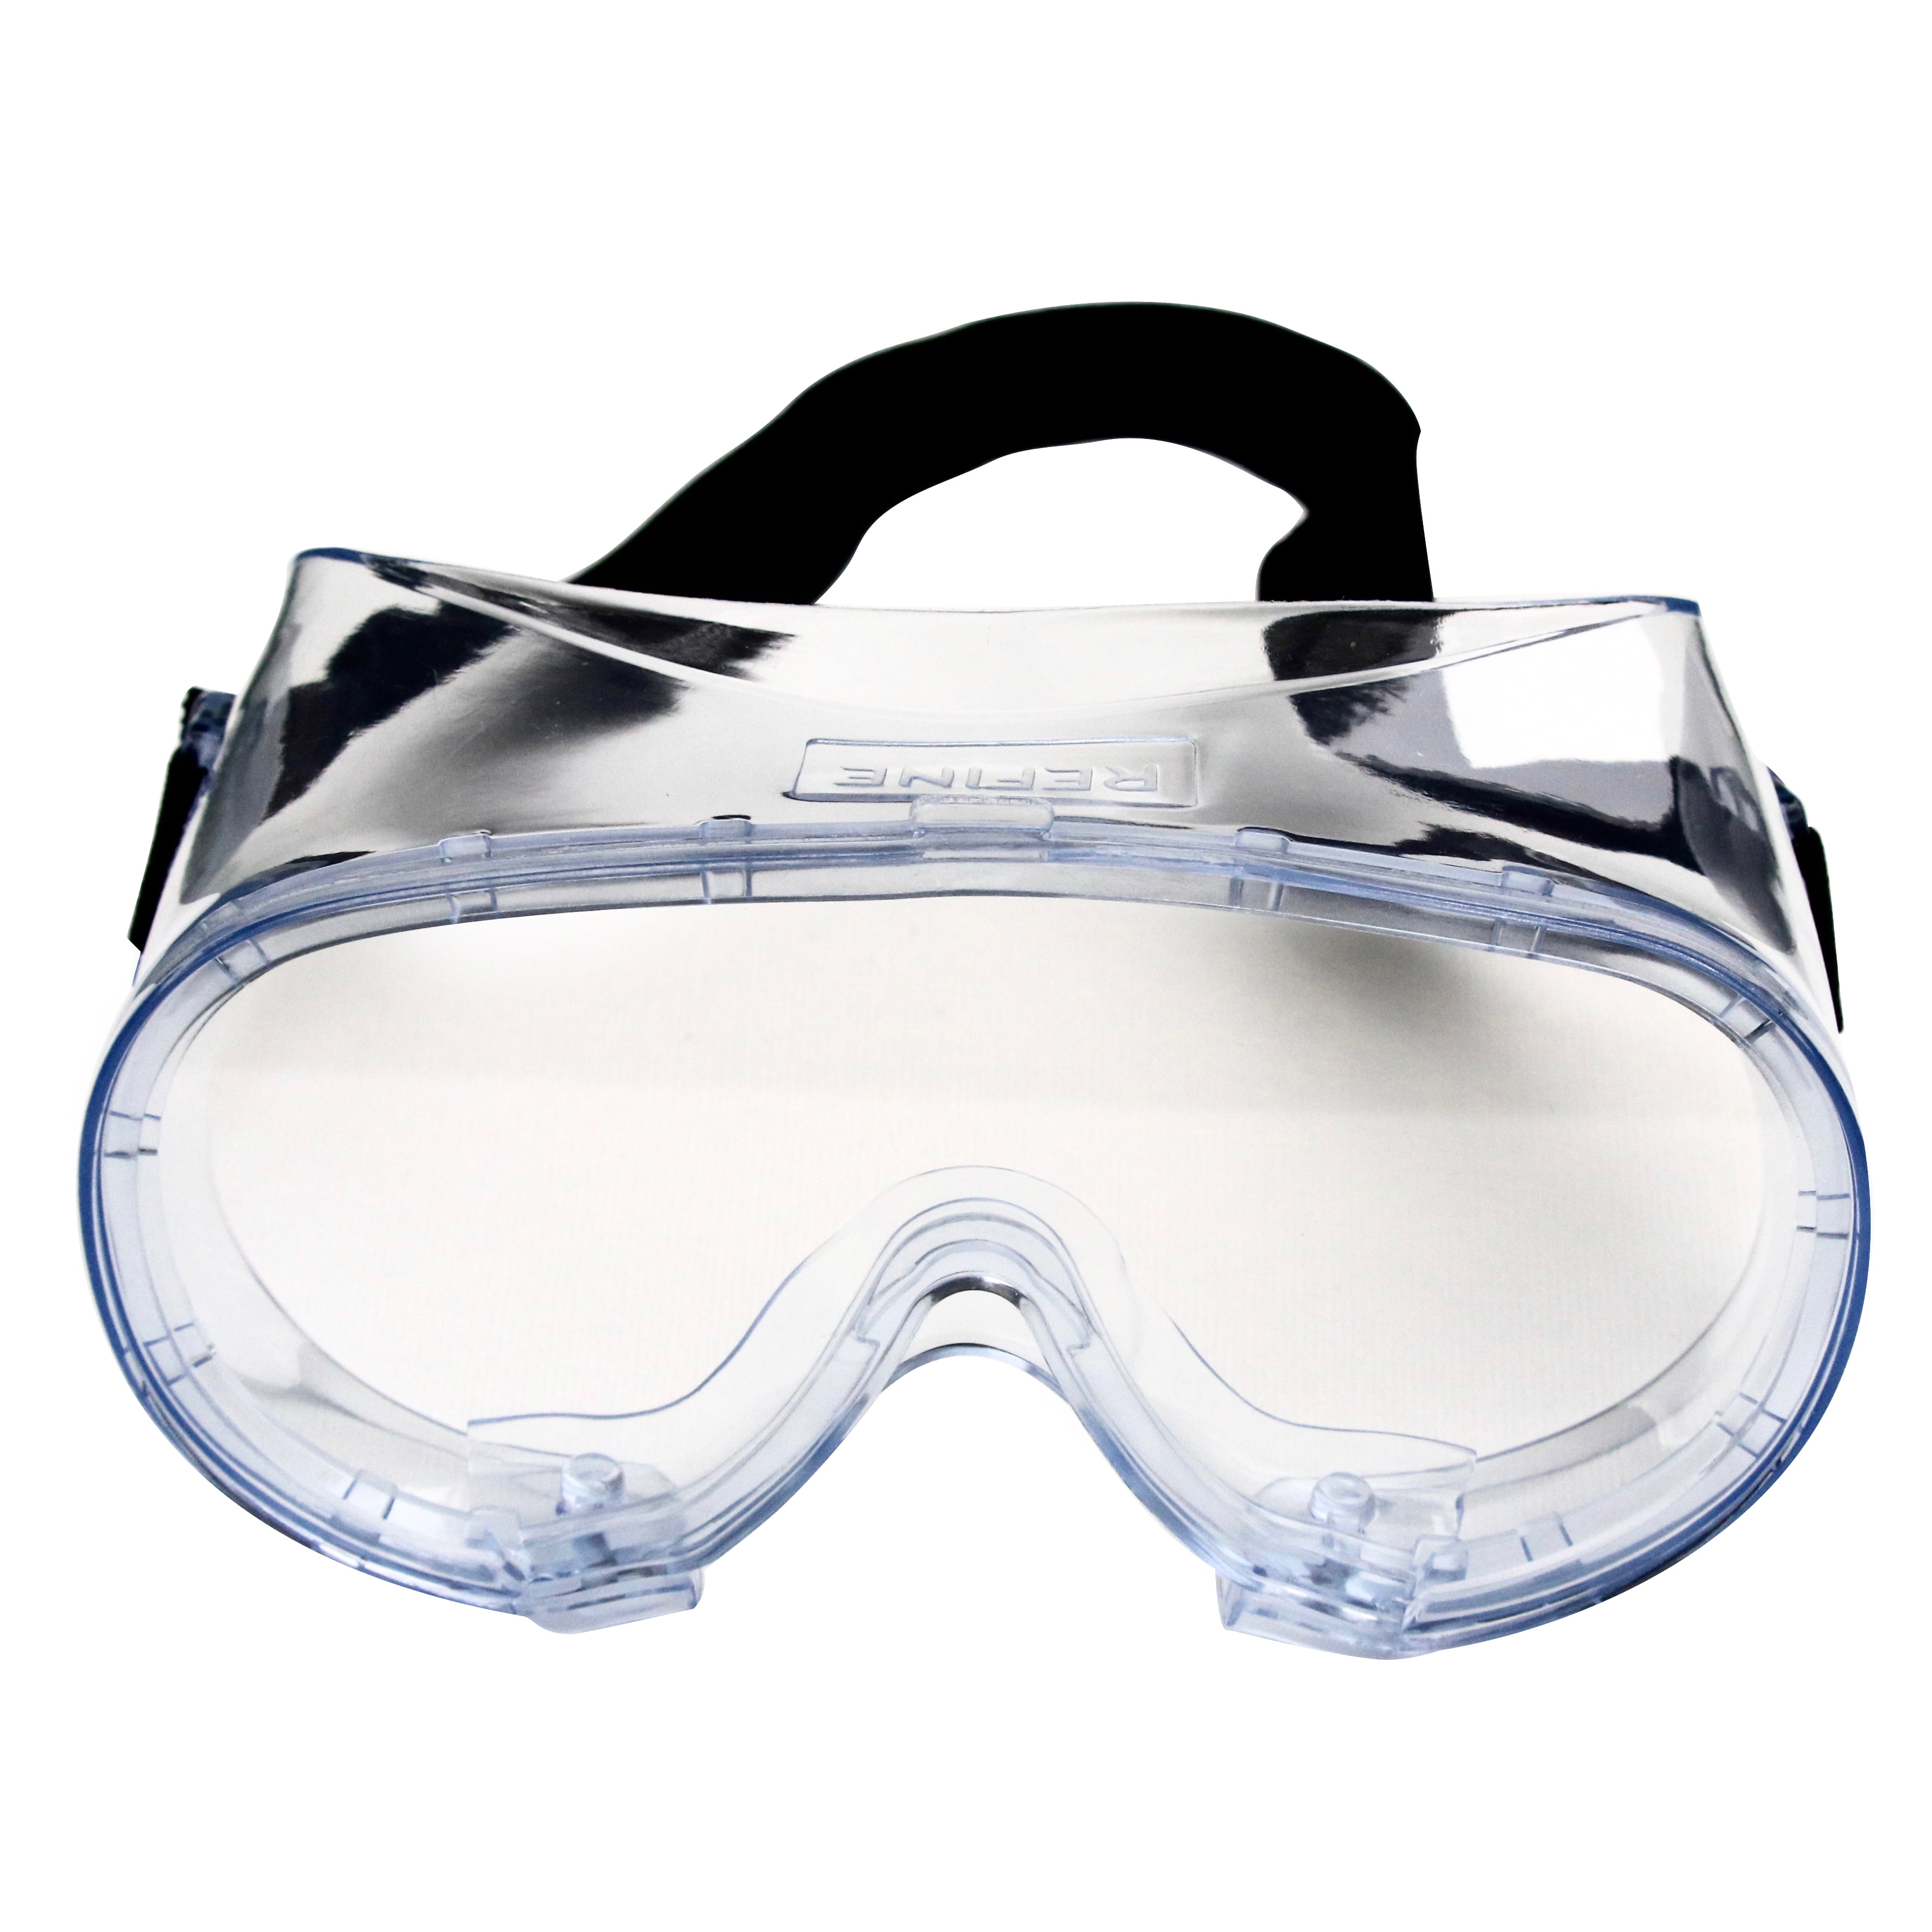 Are safety goggles or glasses better?